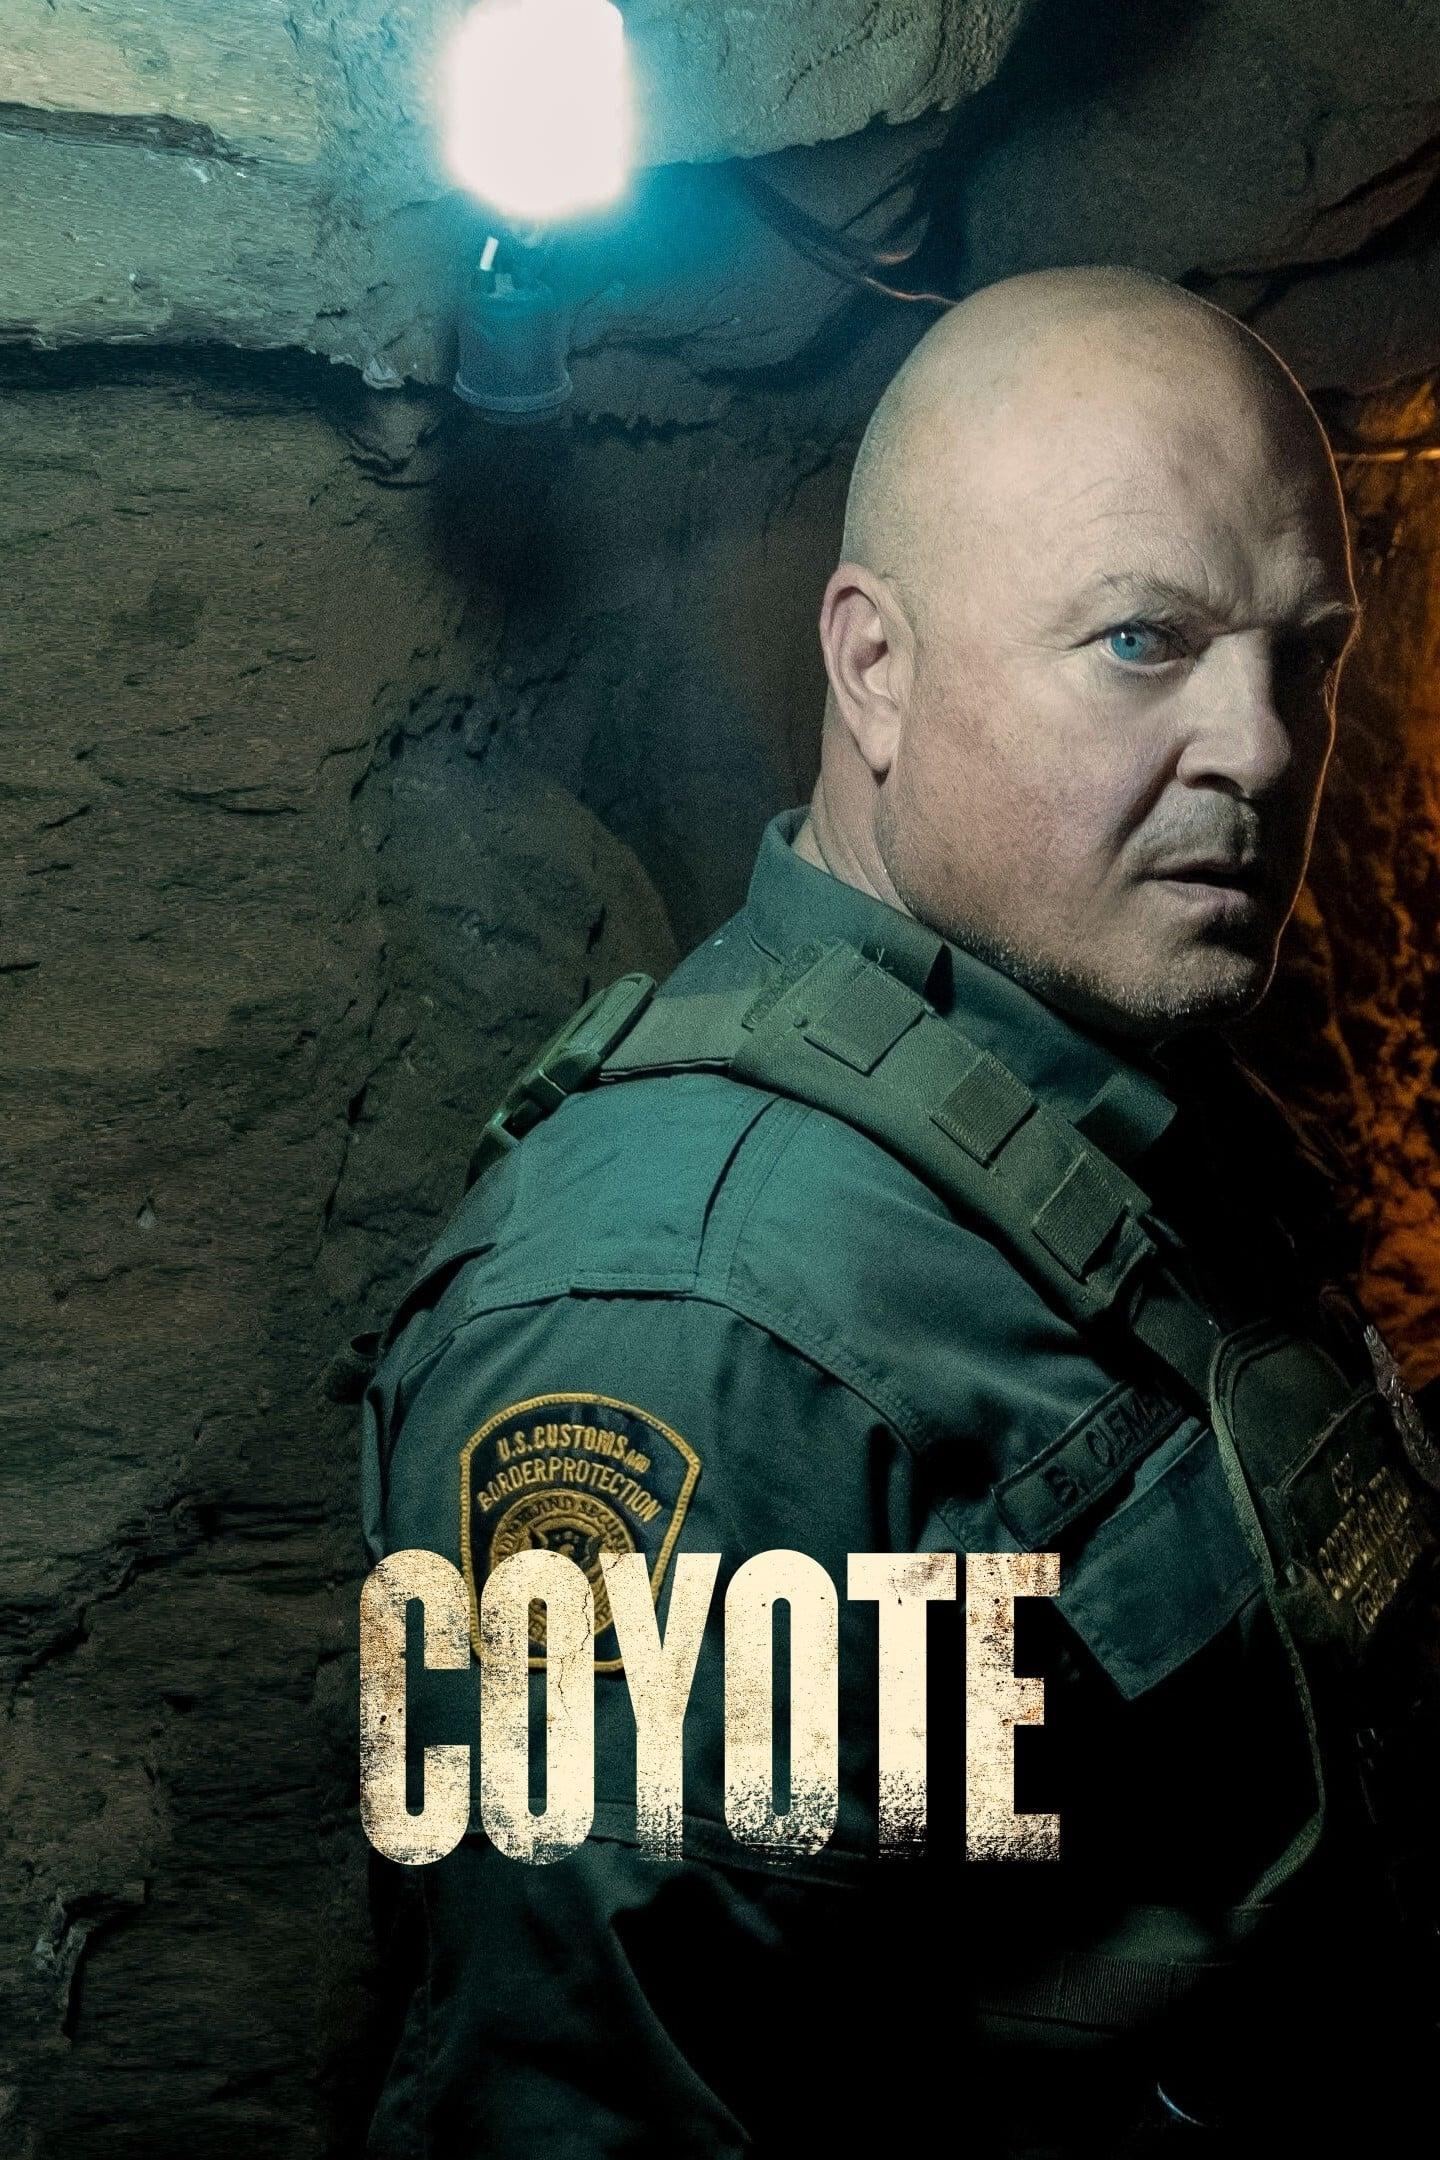 Coyote poster